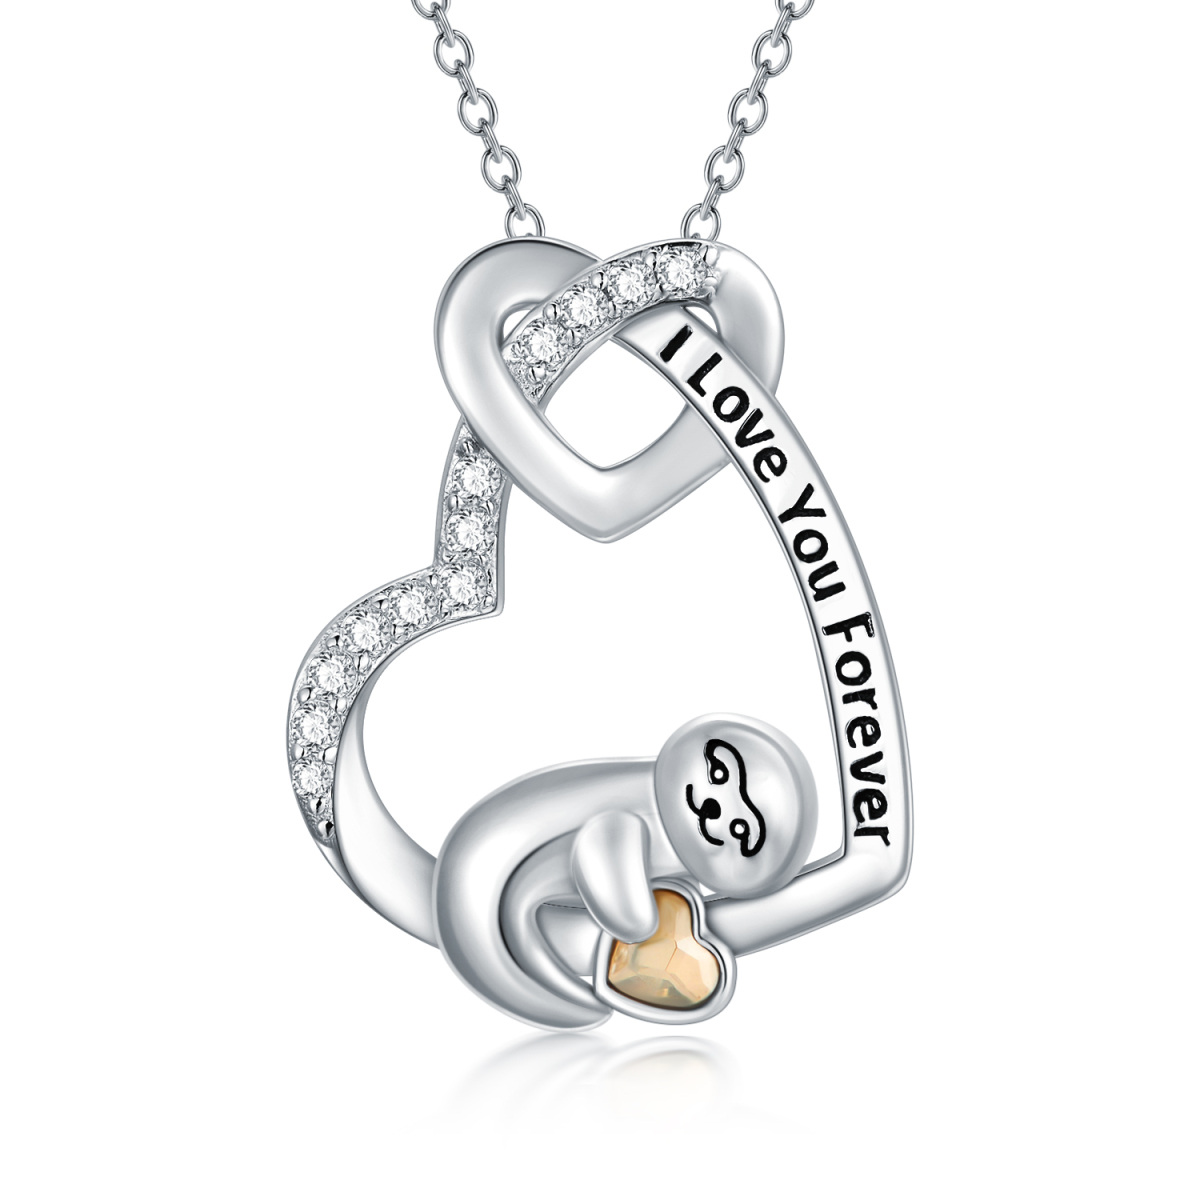 Sterling Silver Heart Shaped Crystal Sloth & Heart Pendant Necklace with Engraved Word-1